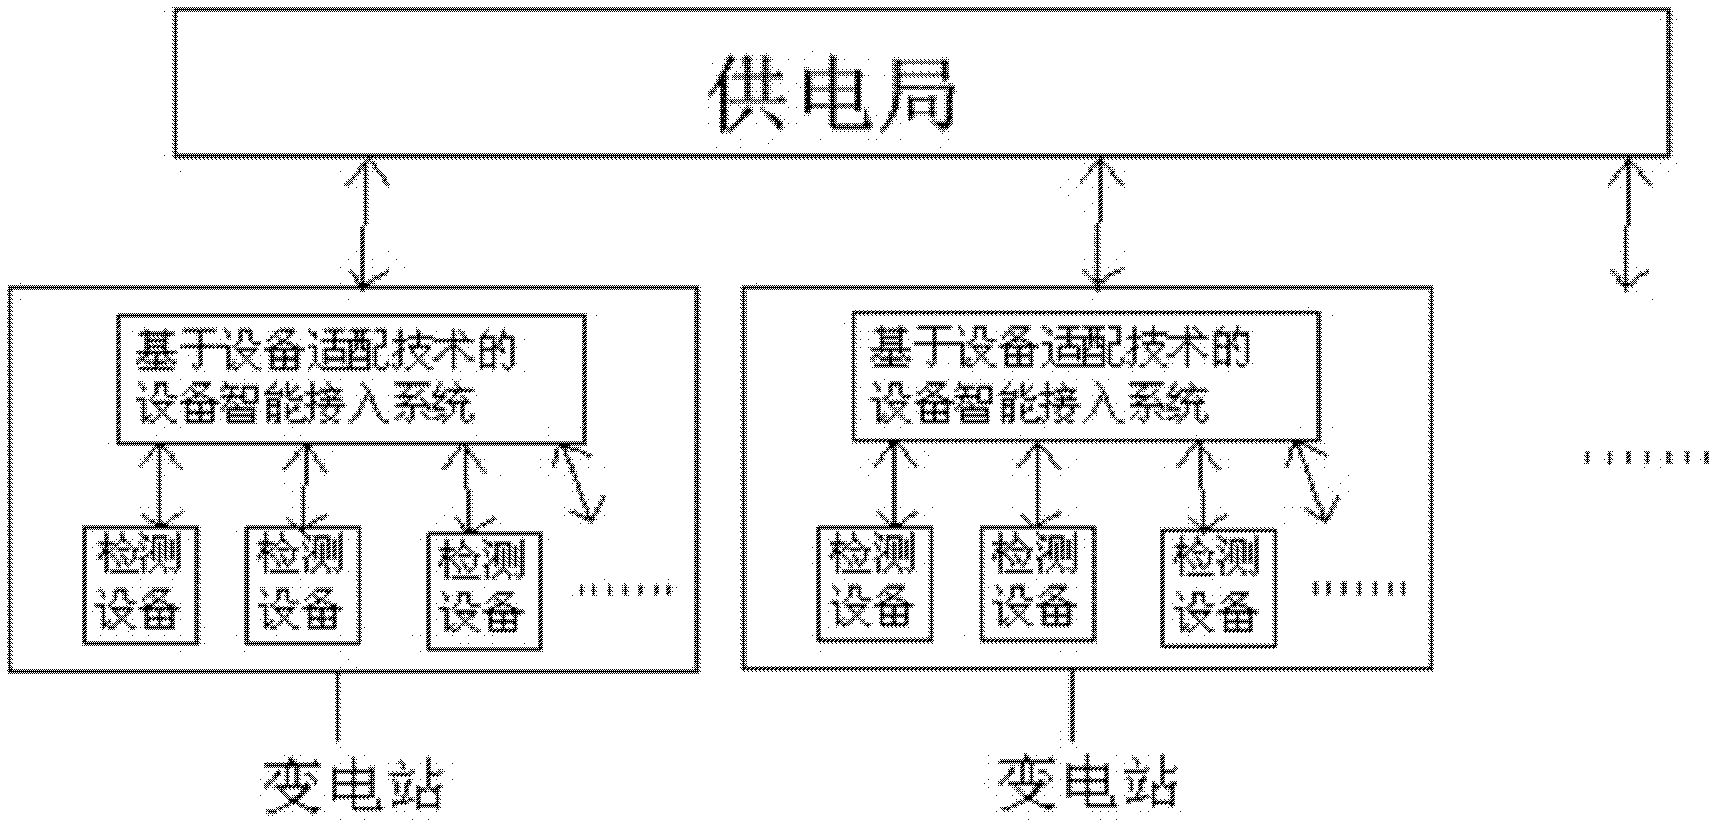 Device intelligent access system based on device adaptation technology, and method of the same